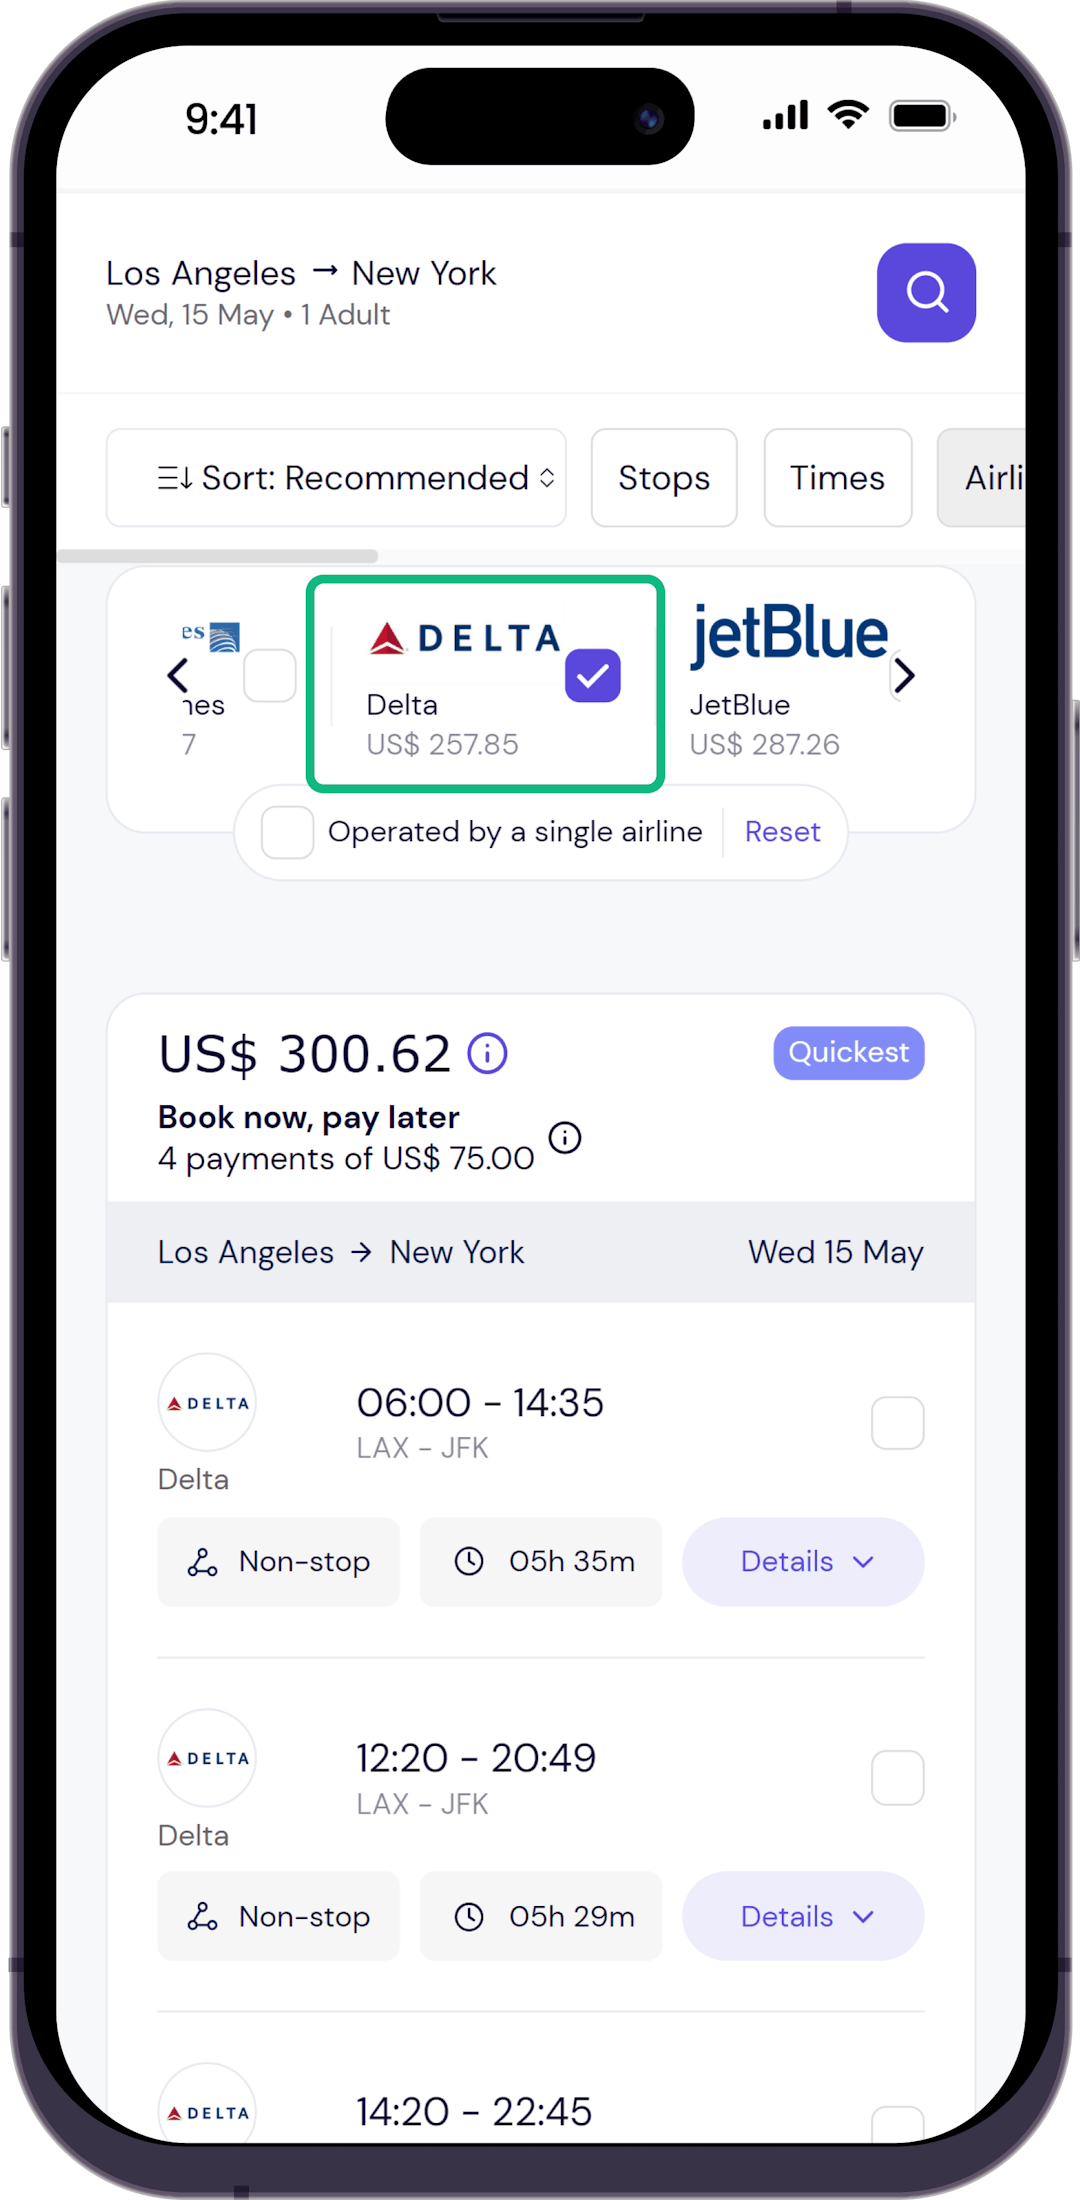 Step 2 - Select Delta as preferred airline to fly with